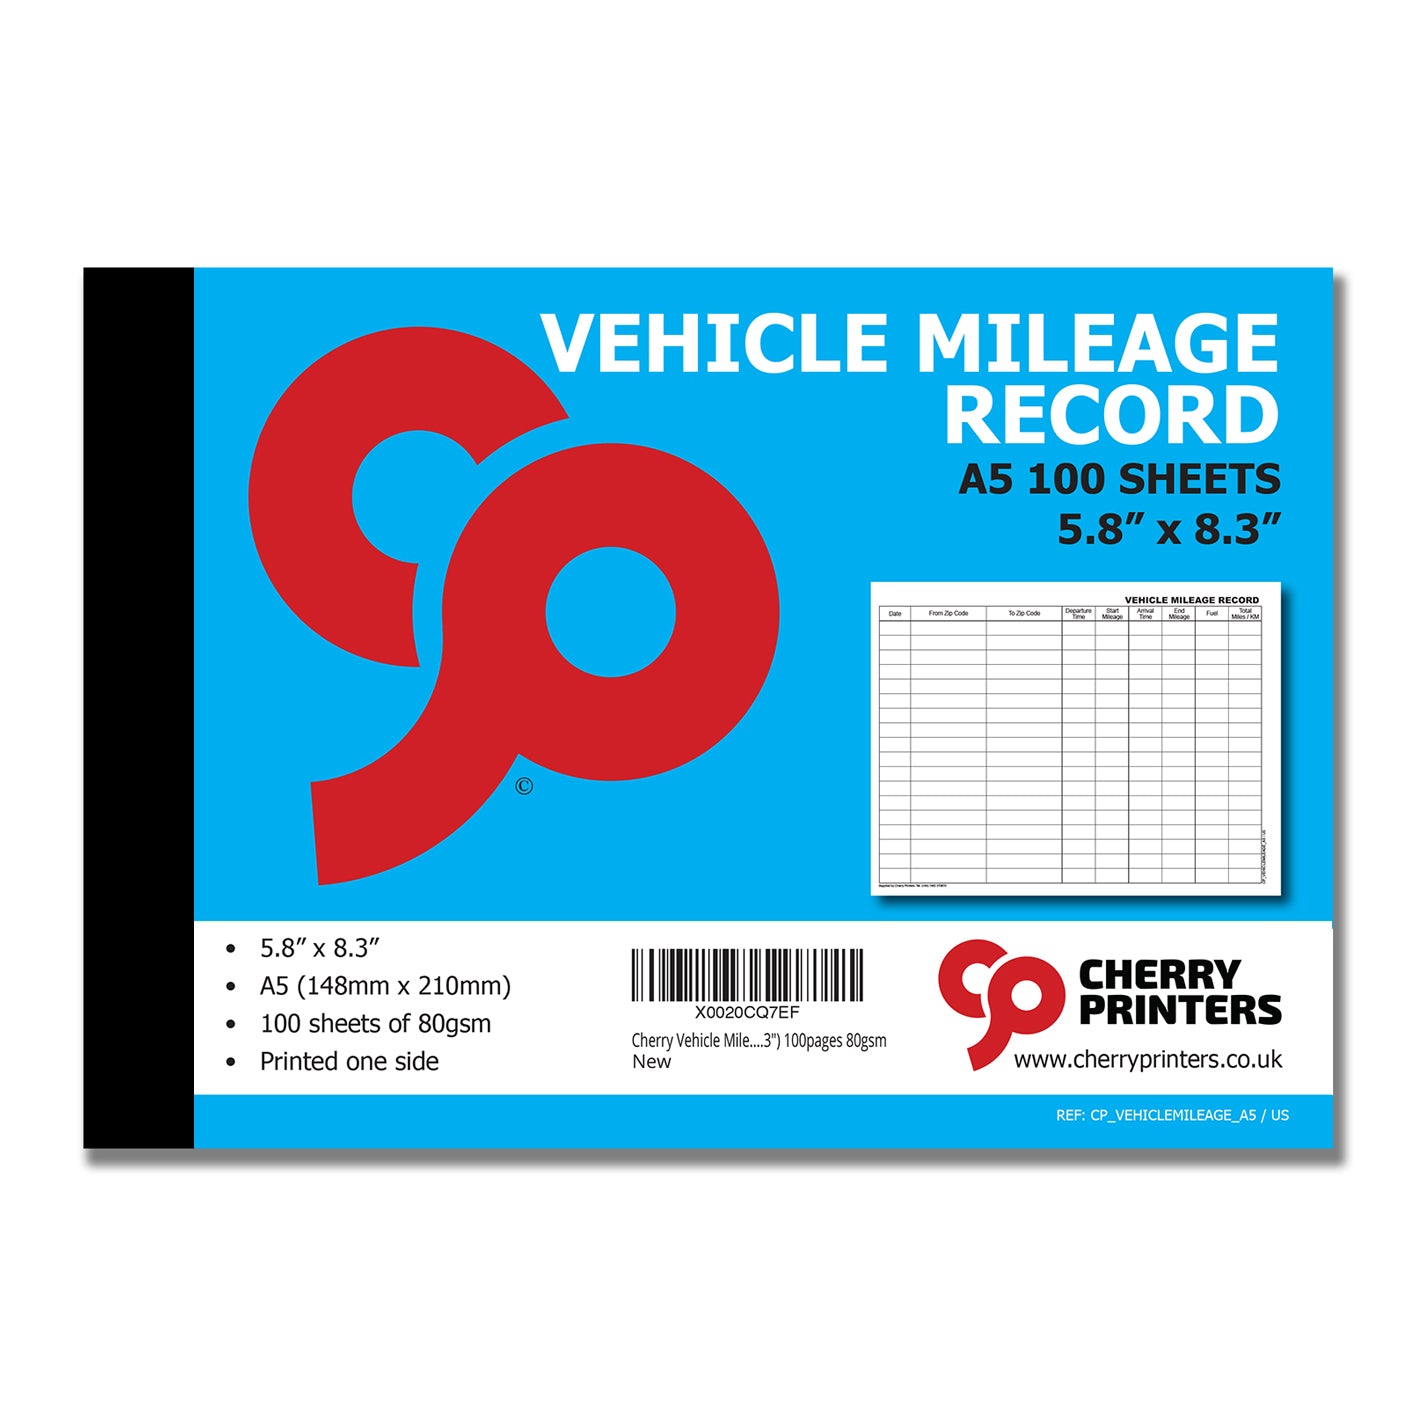 Vehicle Mileage Record Log Book | 100 pages | 80gsm Paper | A5 - 5.8" x 8.3" | BOX OF 40 BOOKS